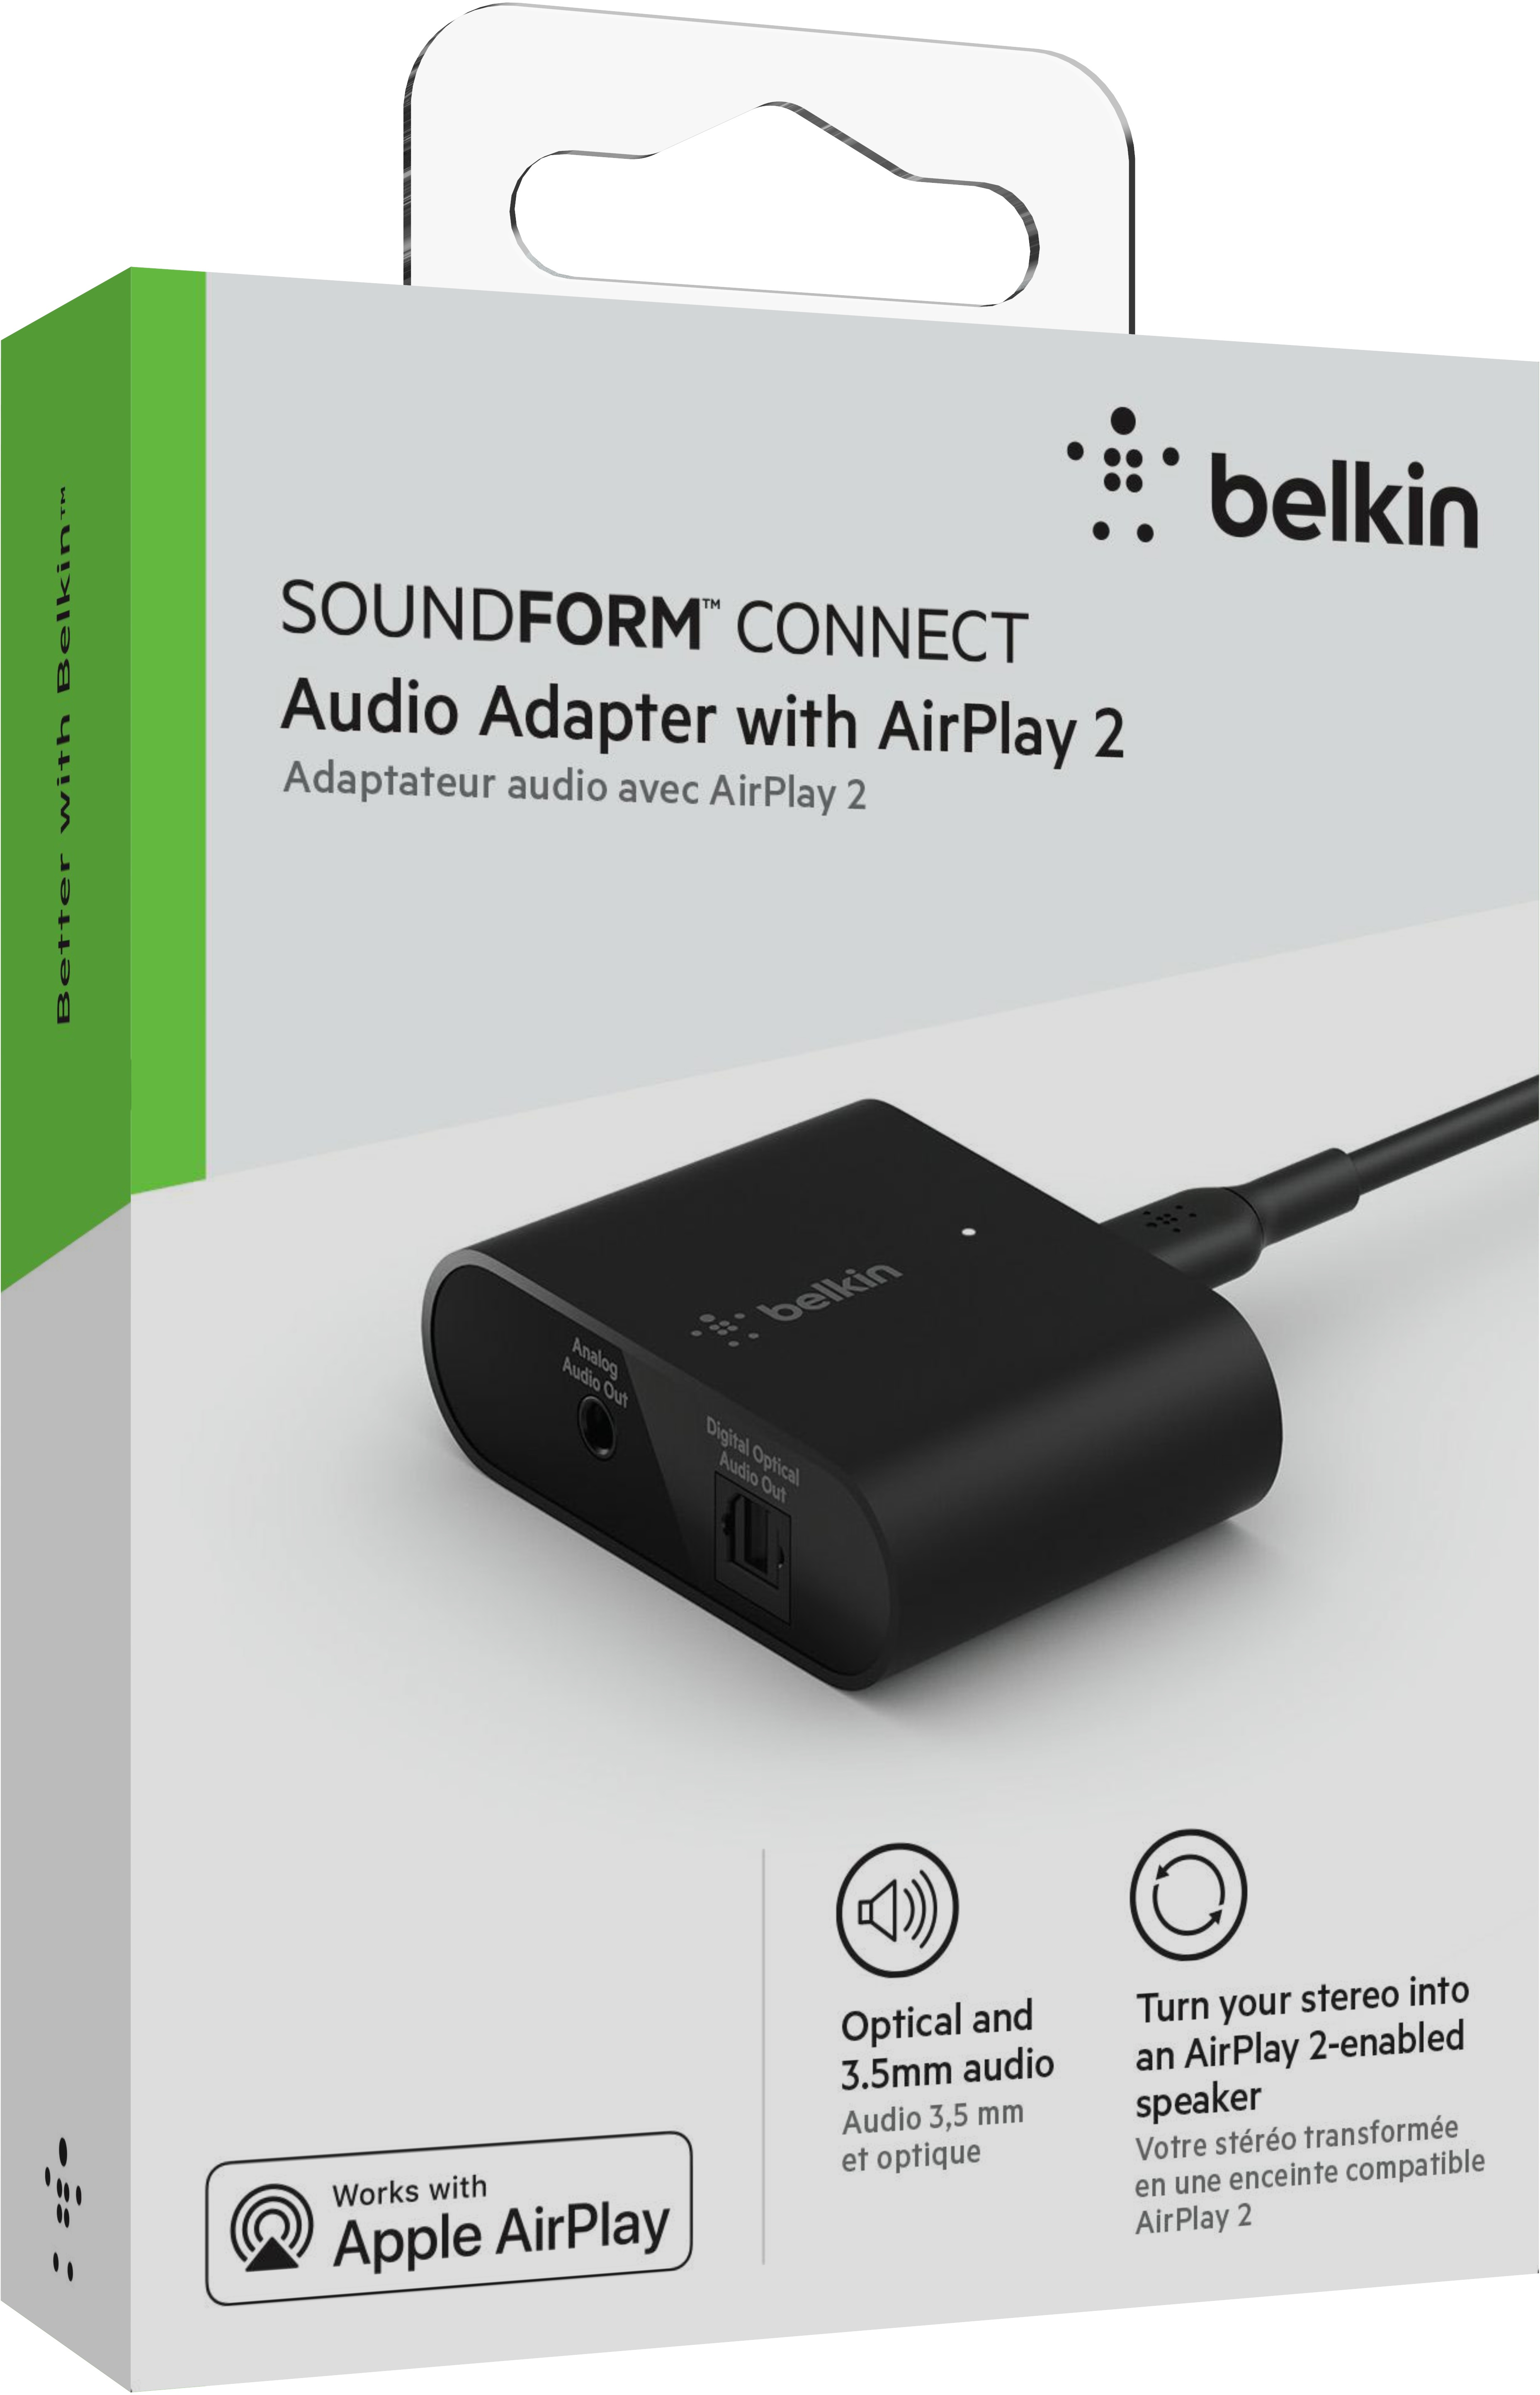 Belkin SOUNDFORM Connect Audio Adapter with AirPlay 2 - Thali